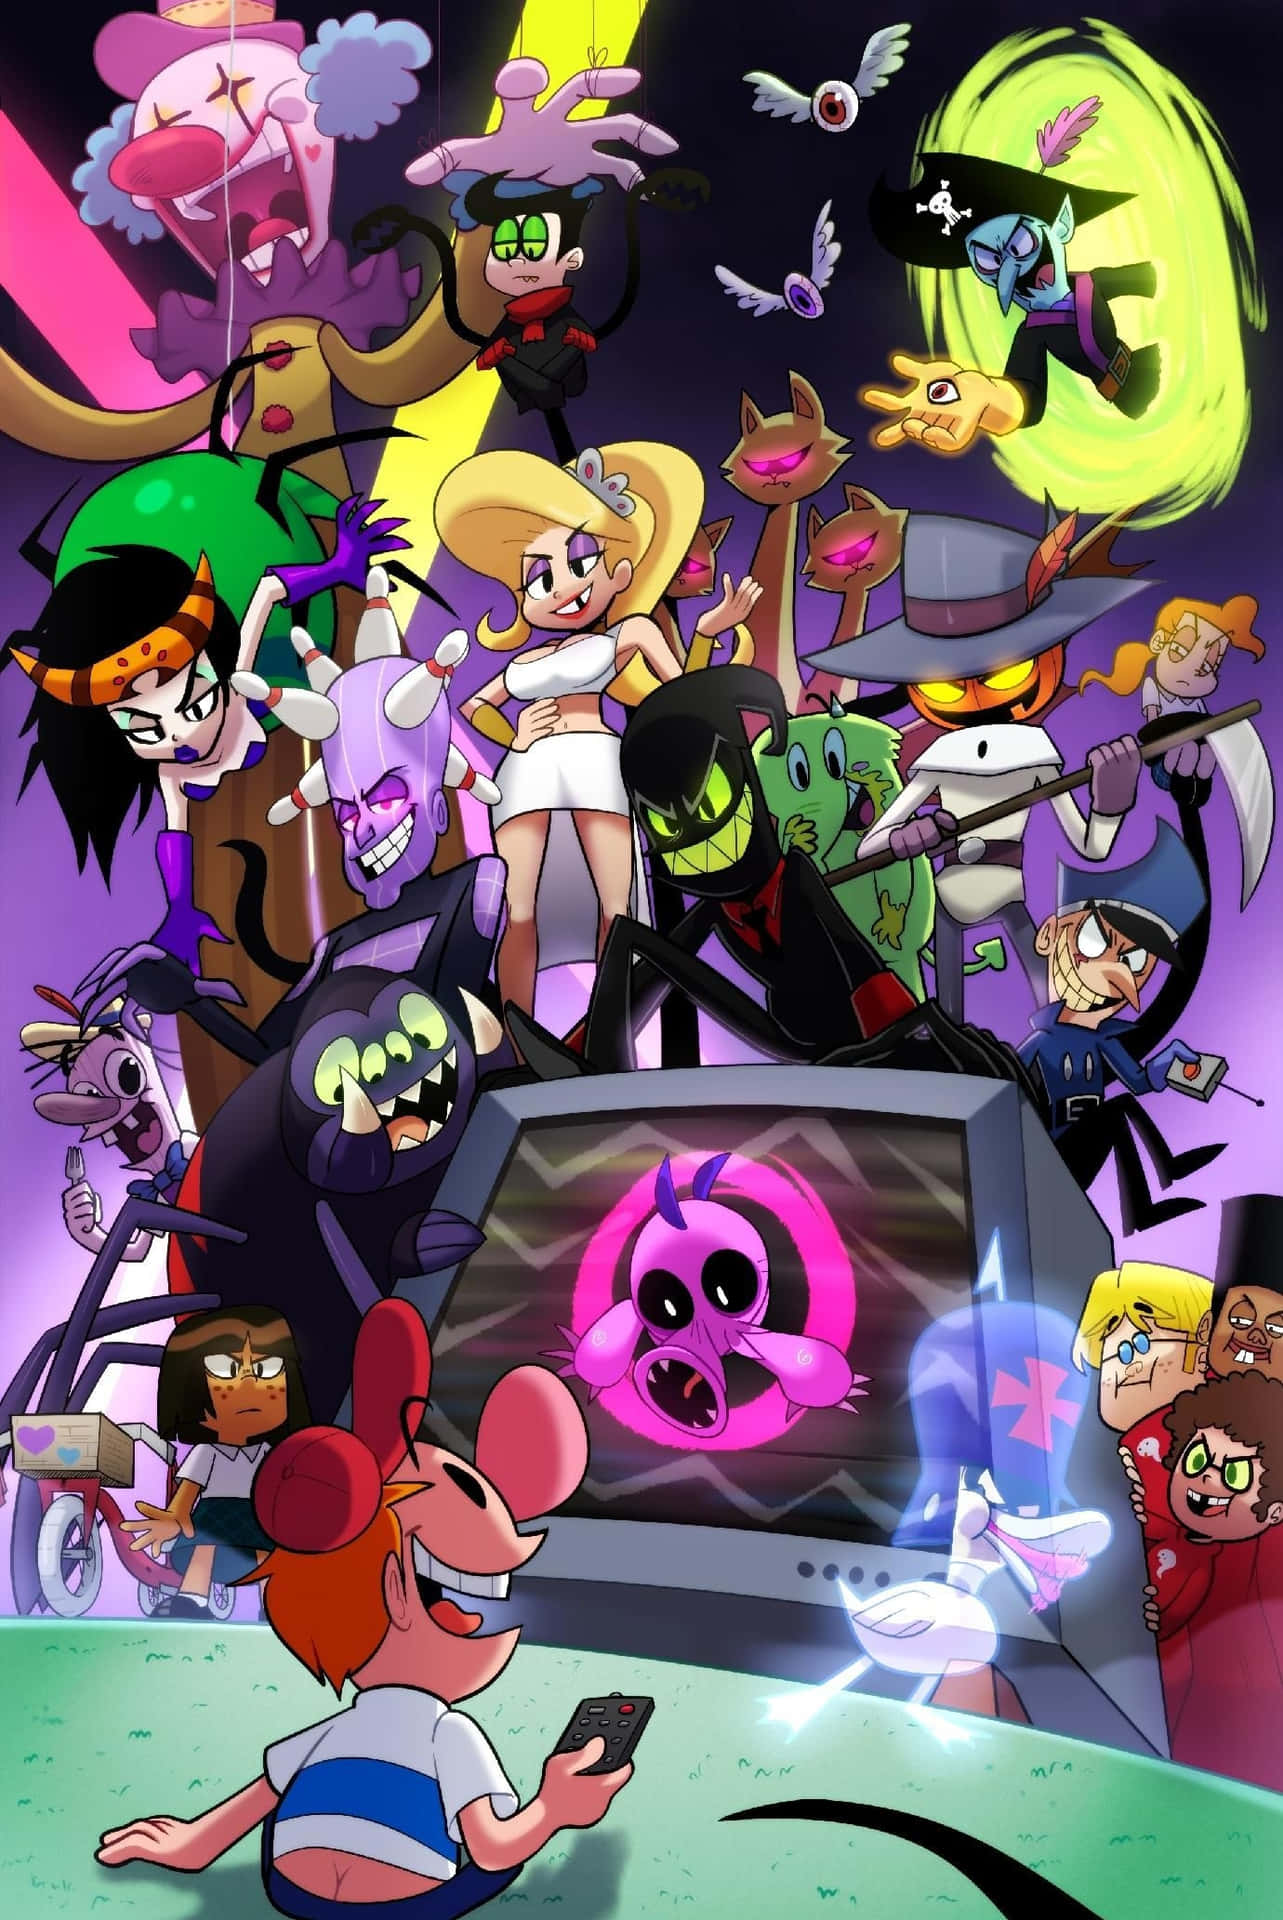 Billy, Mandy, and Grim: The Unlikely Trio in The Grim Adventures of Billy&Mandy Wallpaper